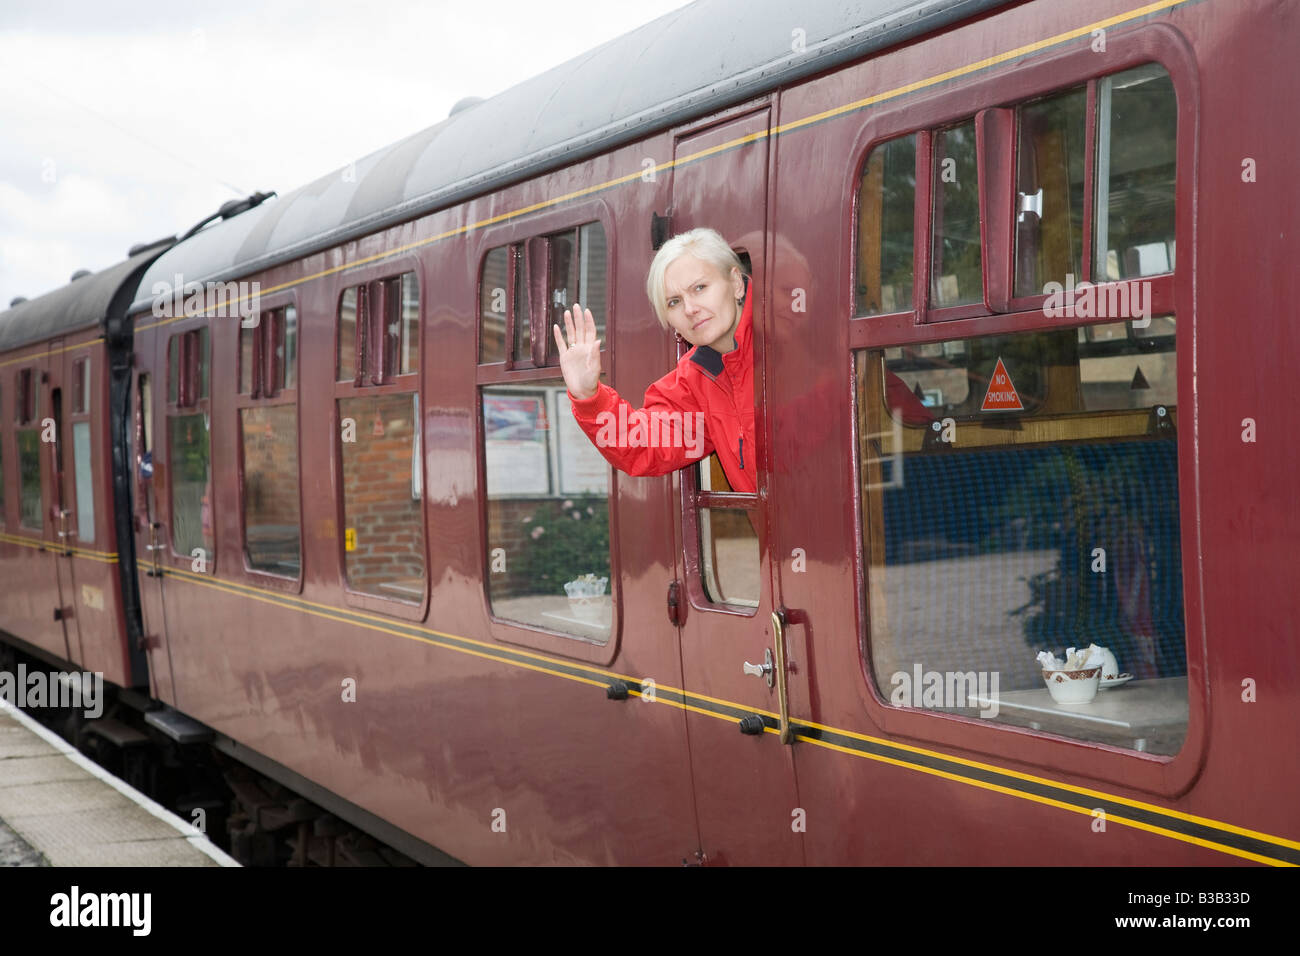 Sad farewell as person leaves on a train. Girl wearing Red Coat and blonde hair Stock Photo